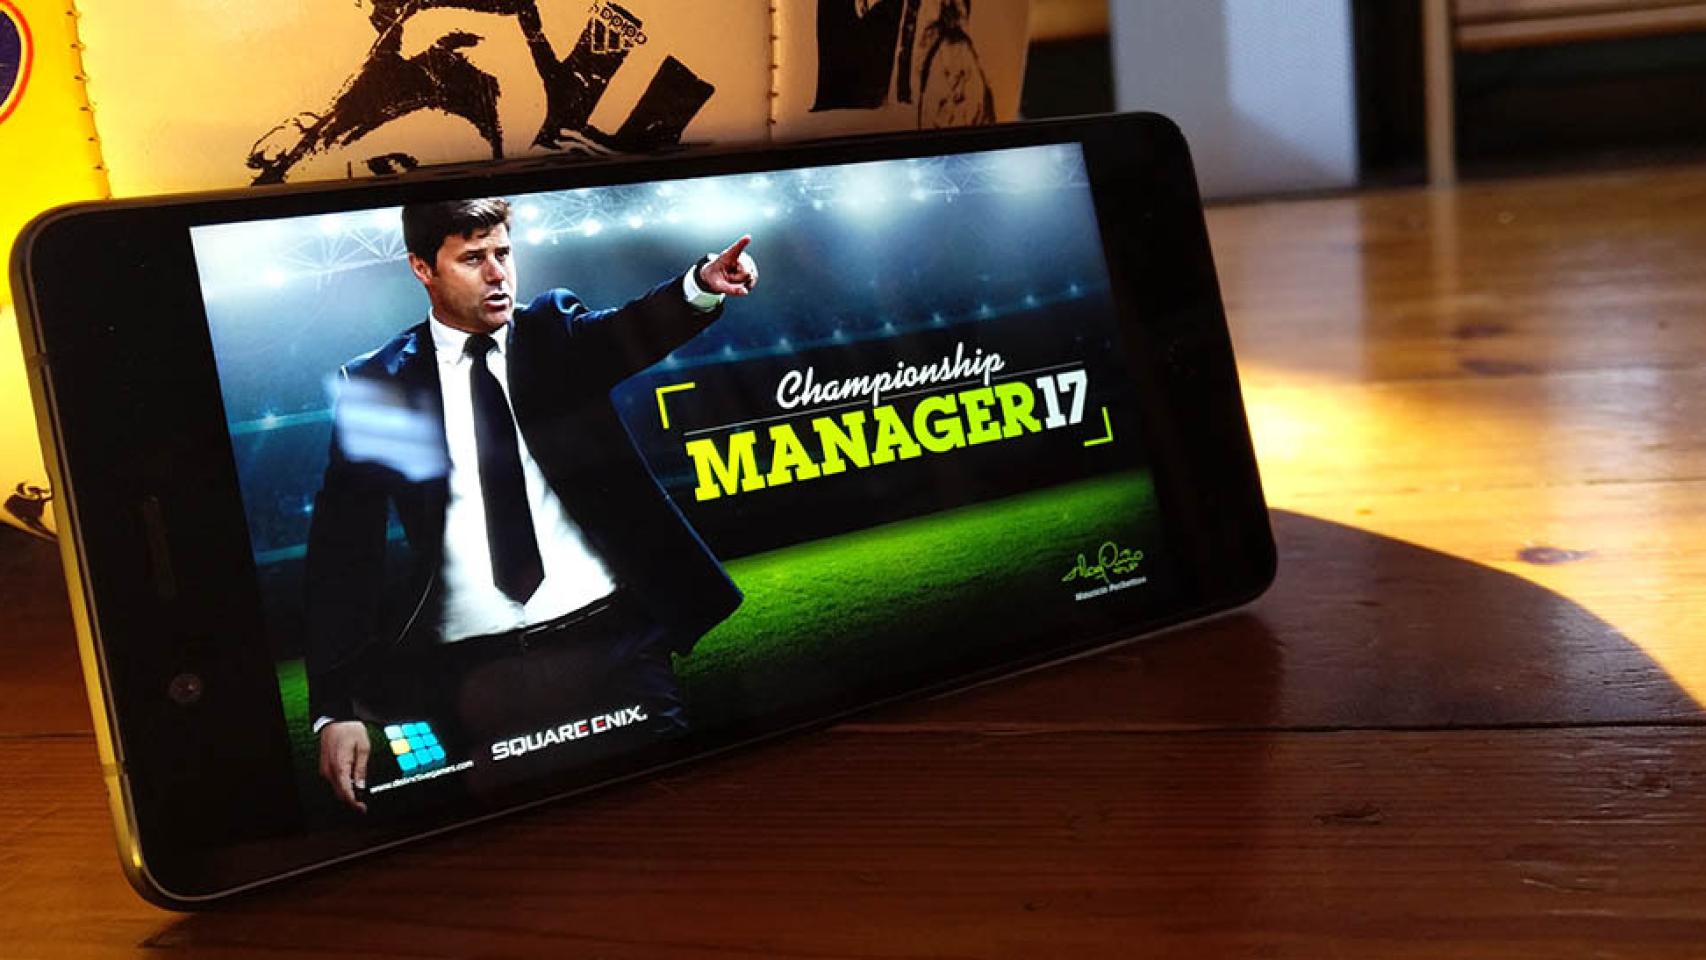 Square Enix's 'Championship Manager 2017' Dribbles onto the App